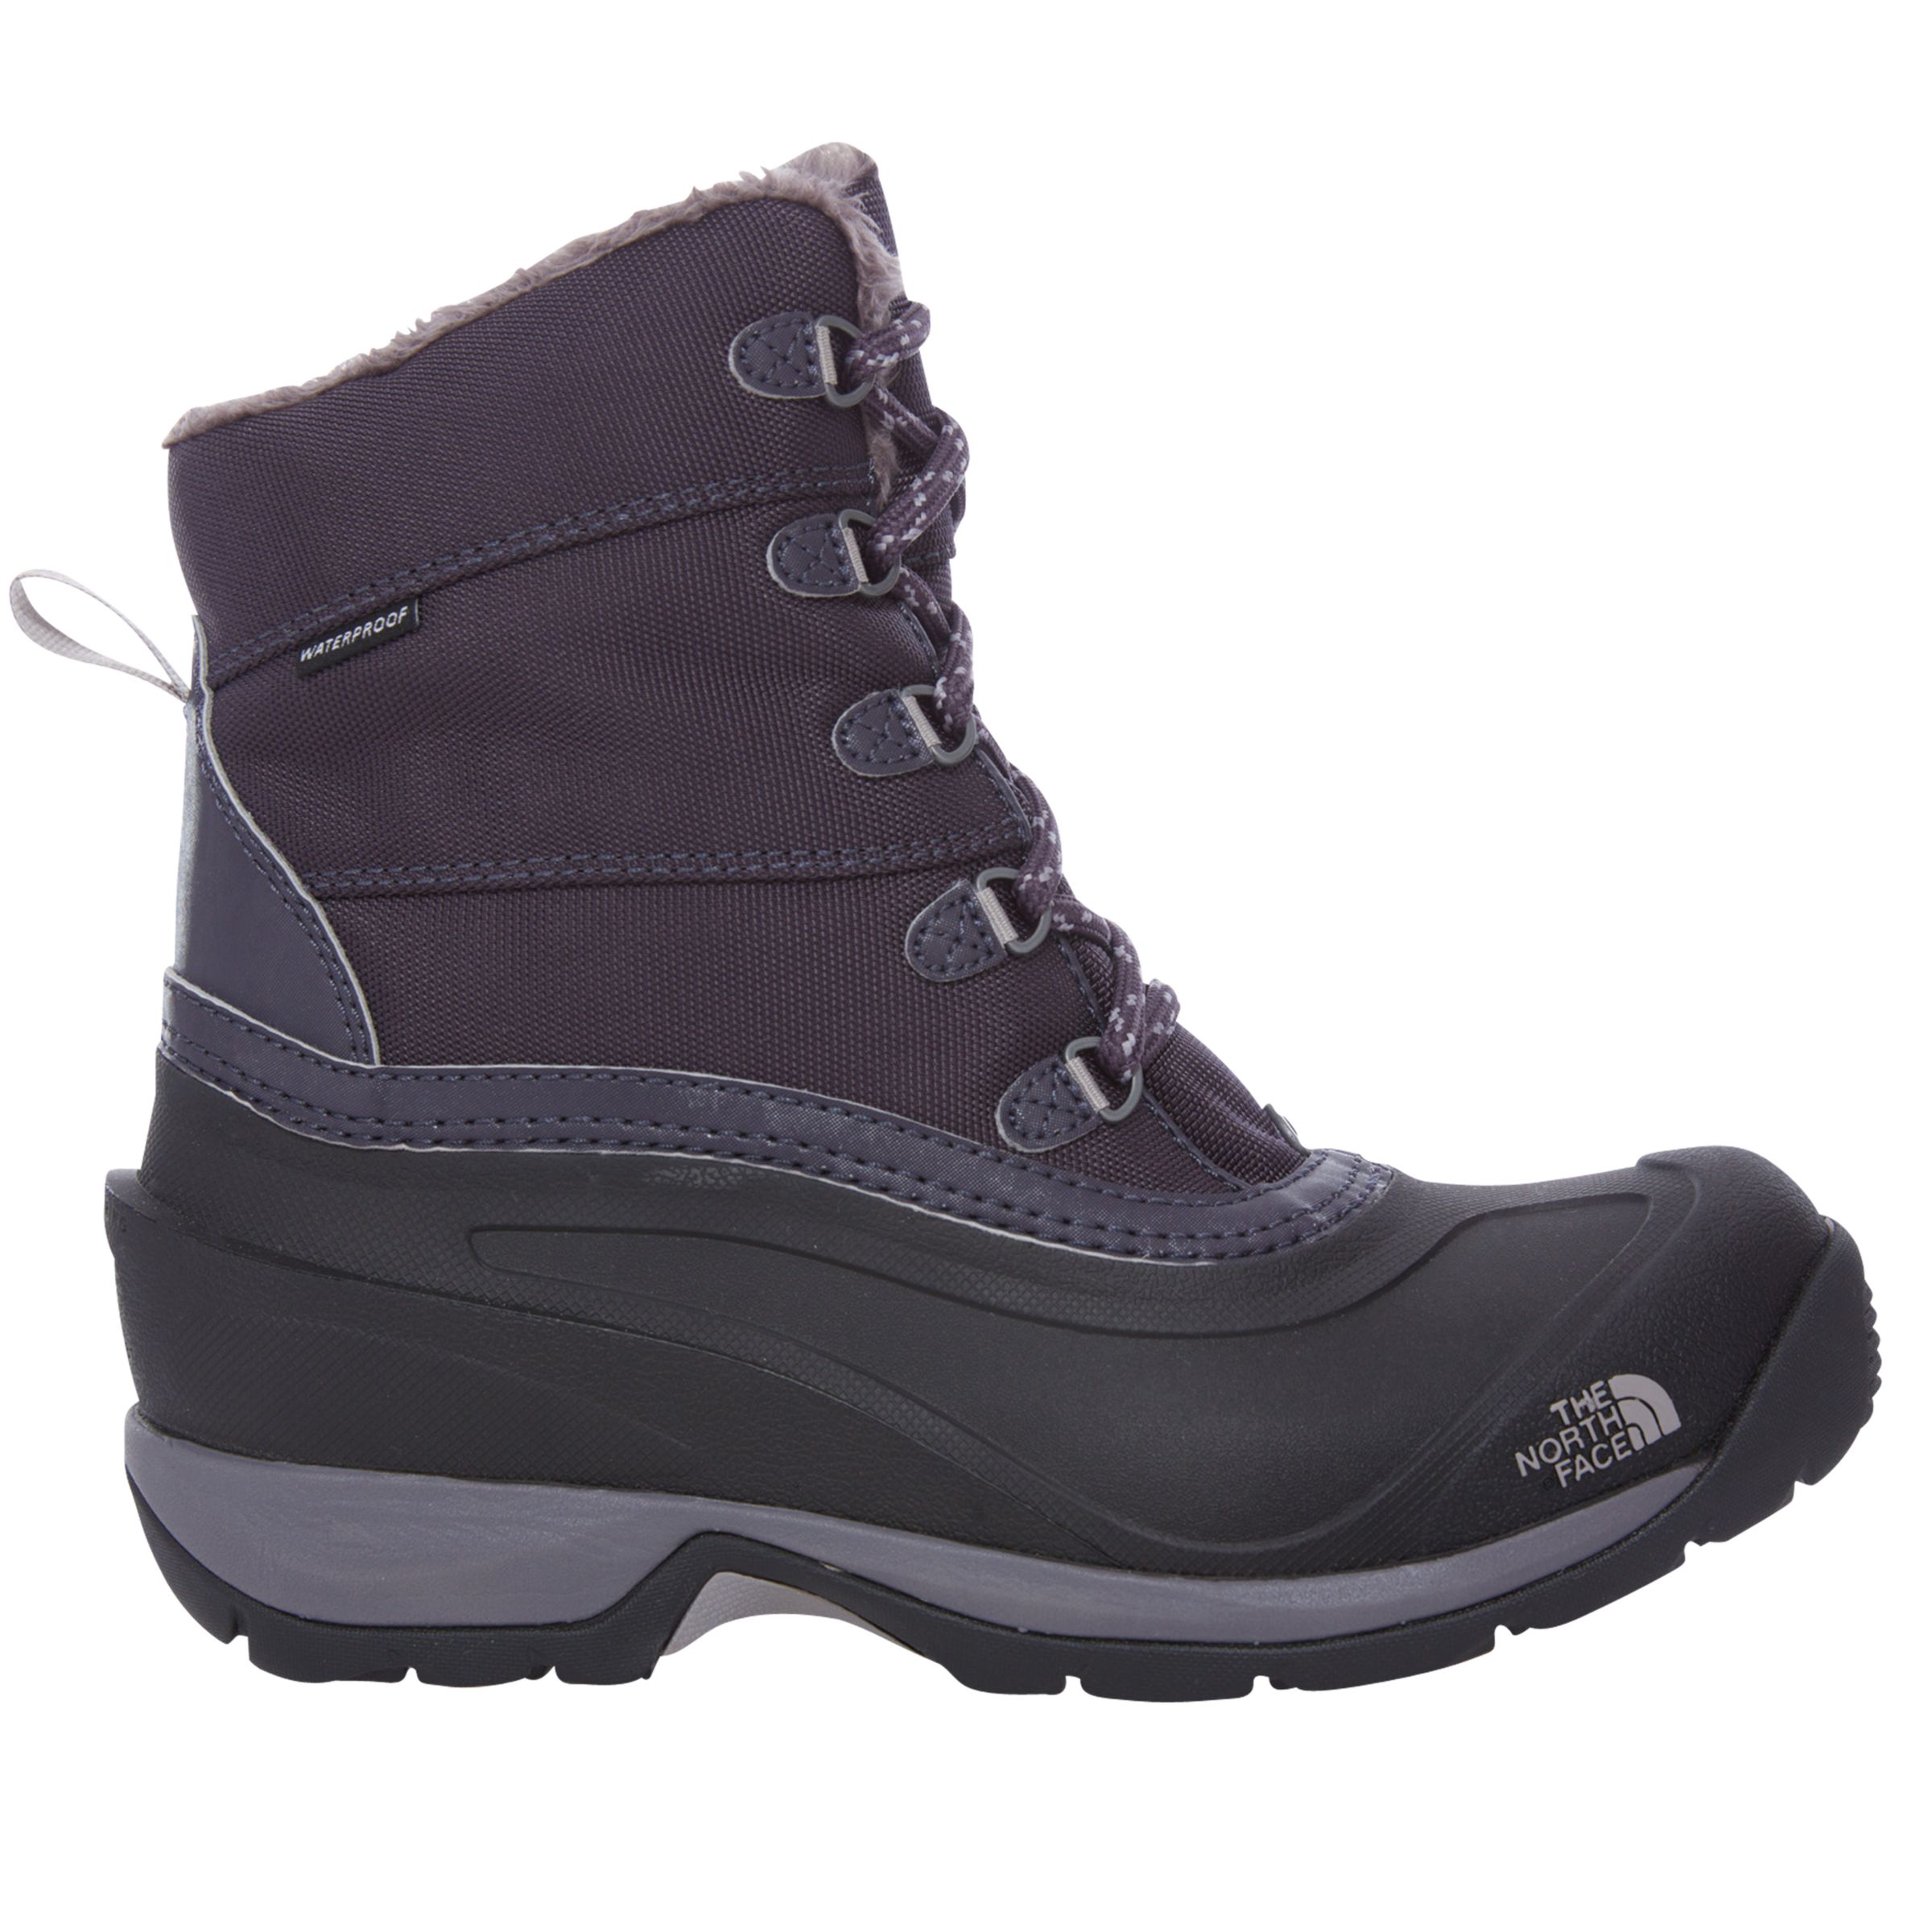 North Face Boots Womens Sale Online Shopping For Women Men Kids Fashion Lifestyle Free Delivery Returns